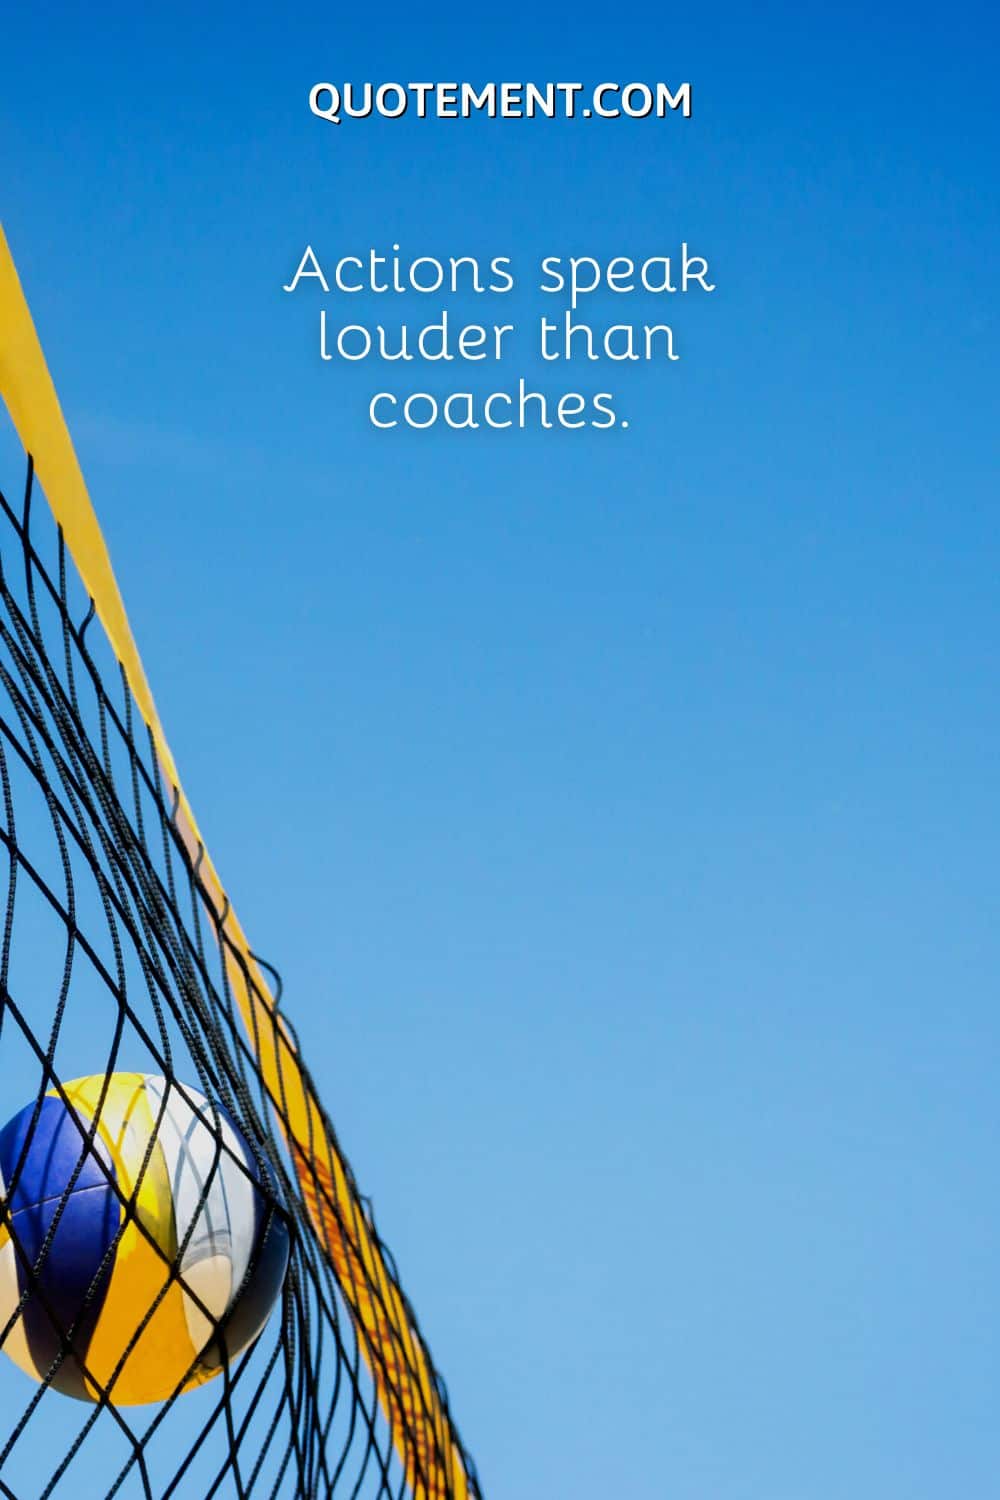 Actions speak louder than coaches.